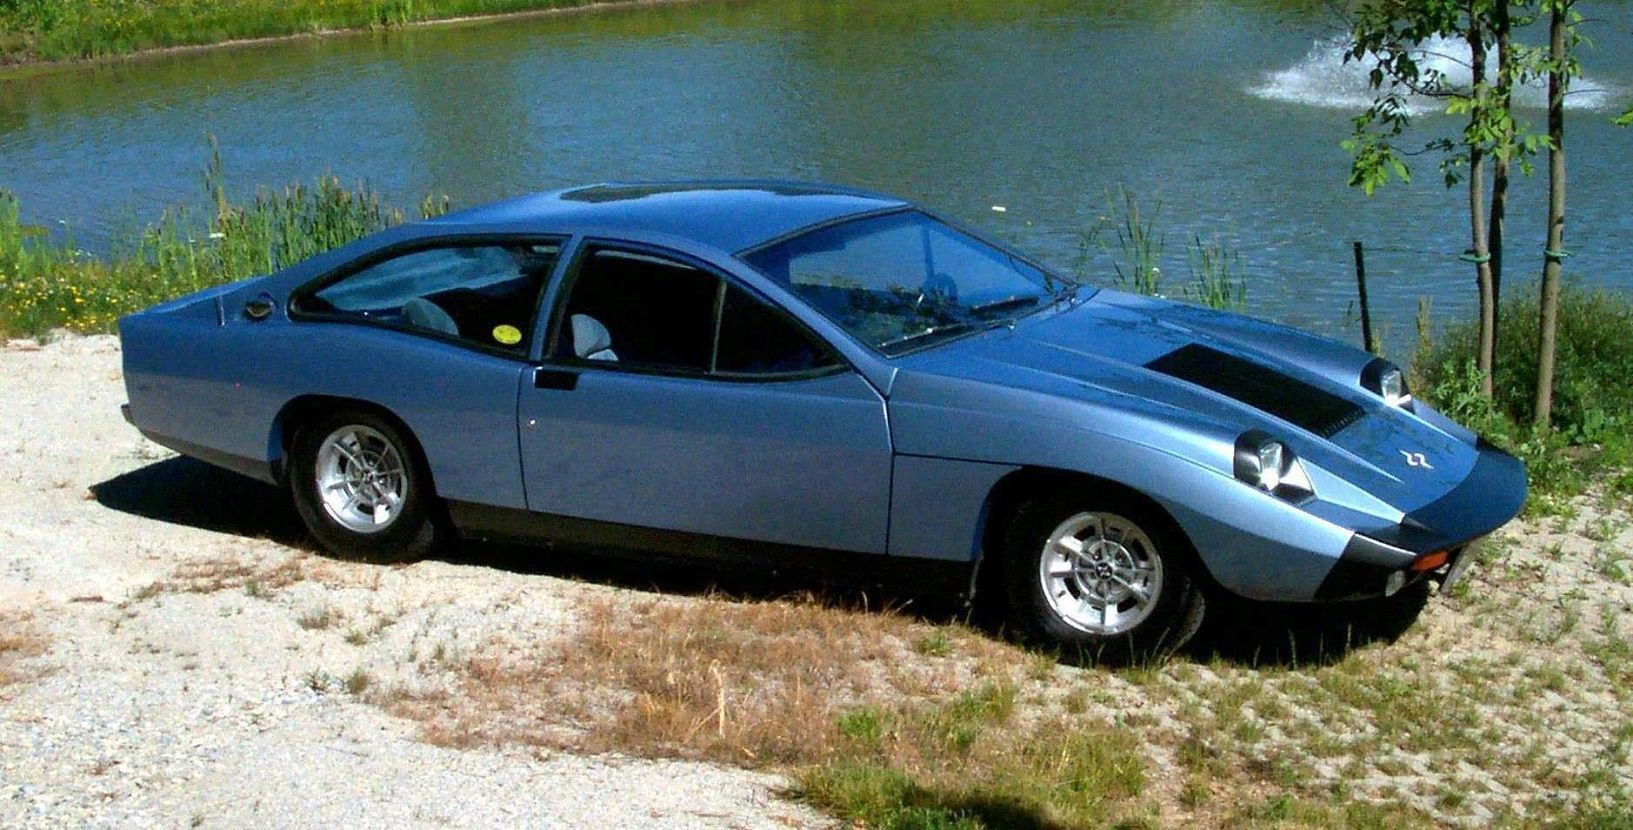 Metallic blue Marcos Mantis parked on dirt by a pond